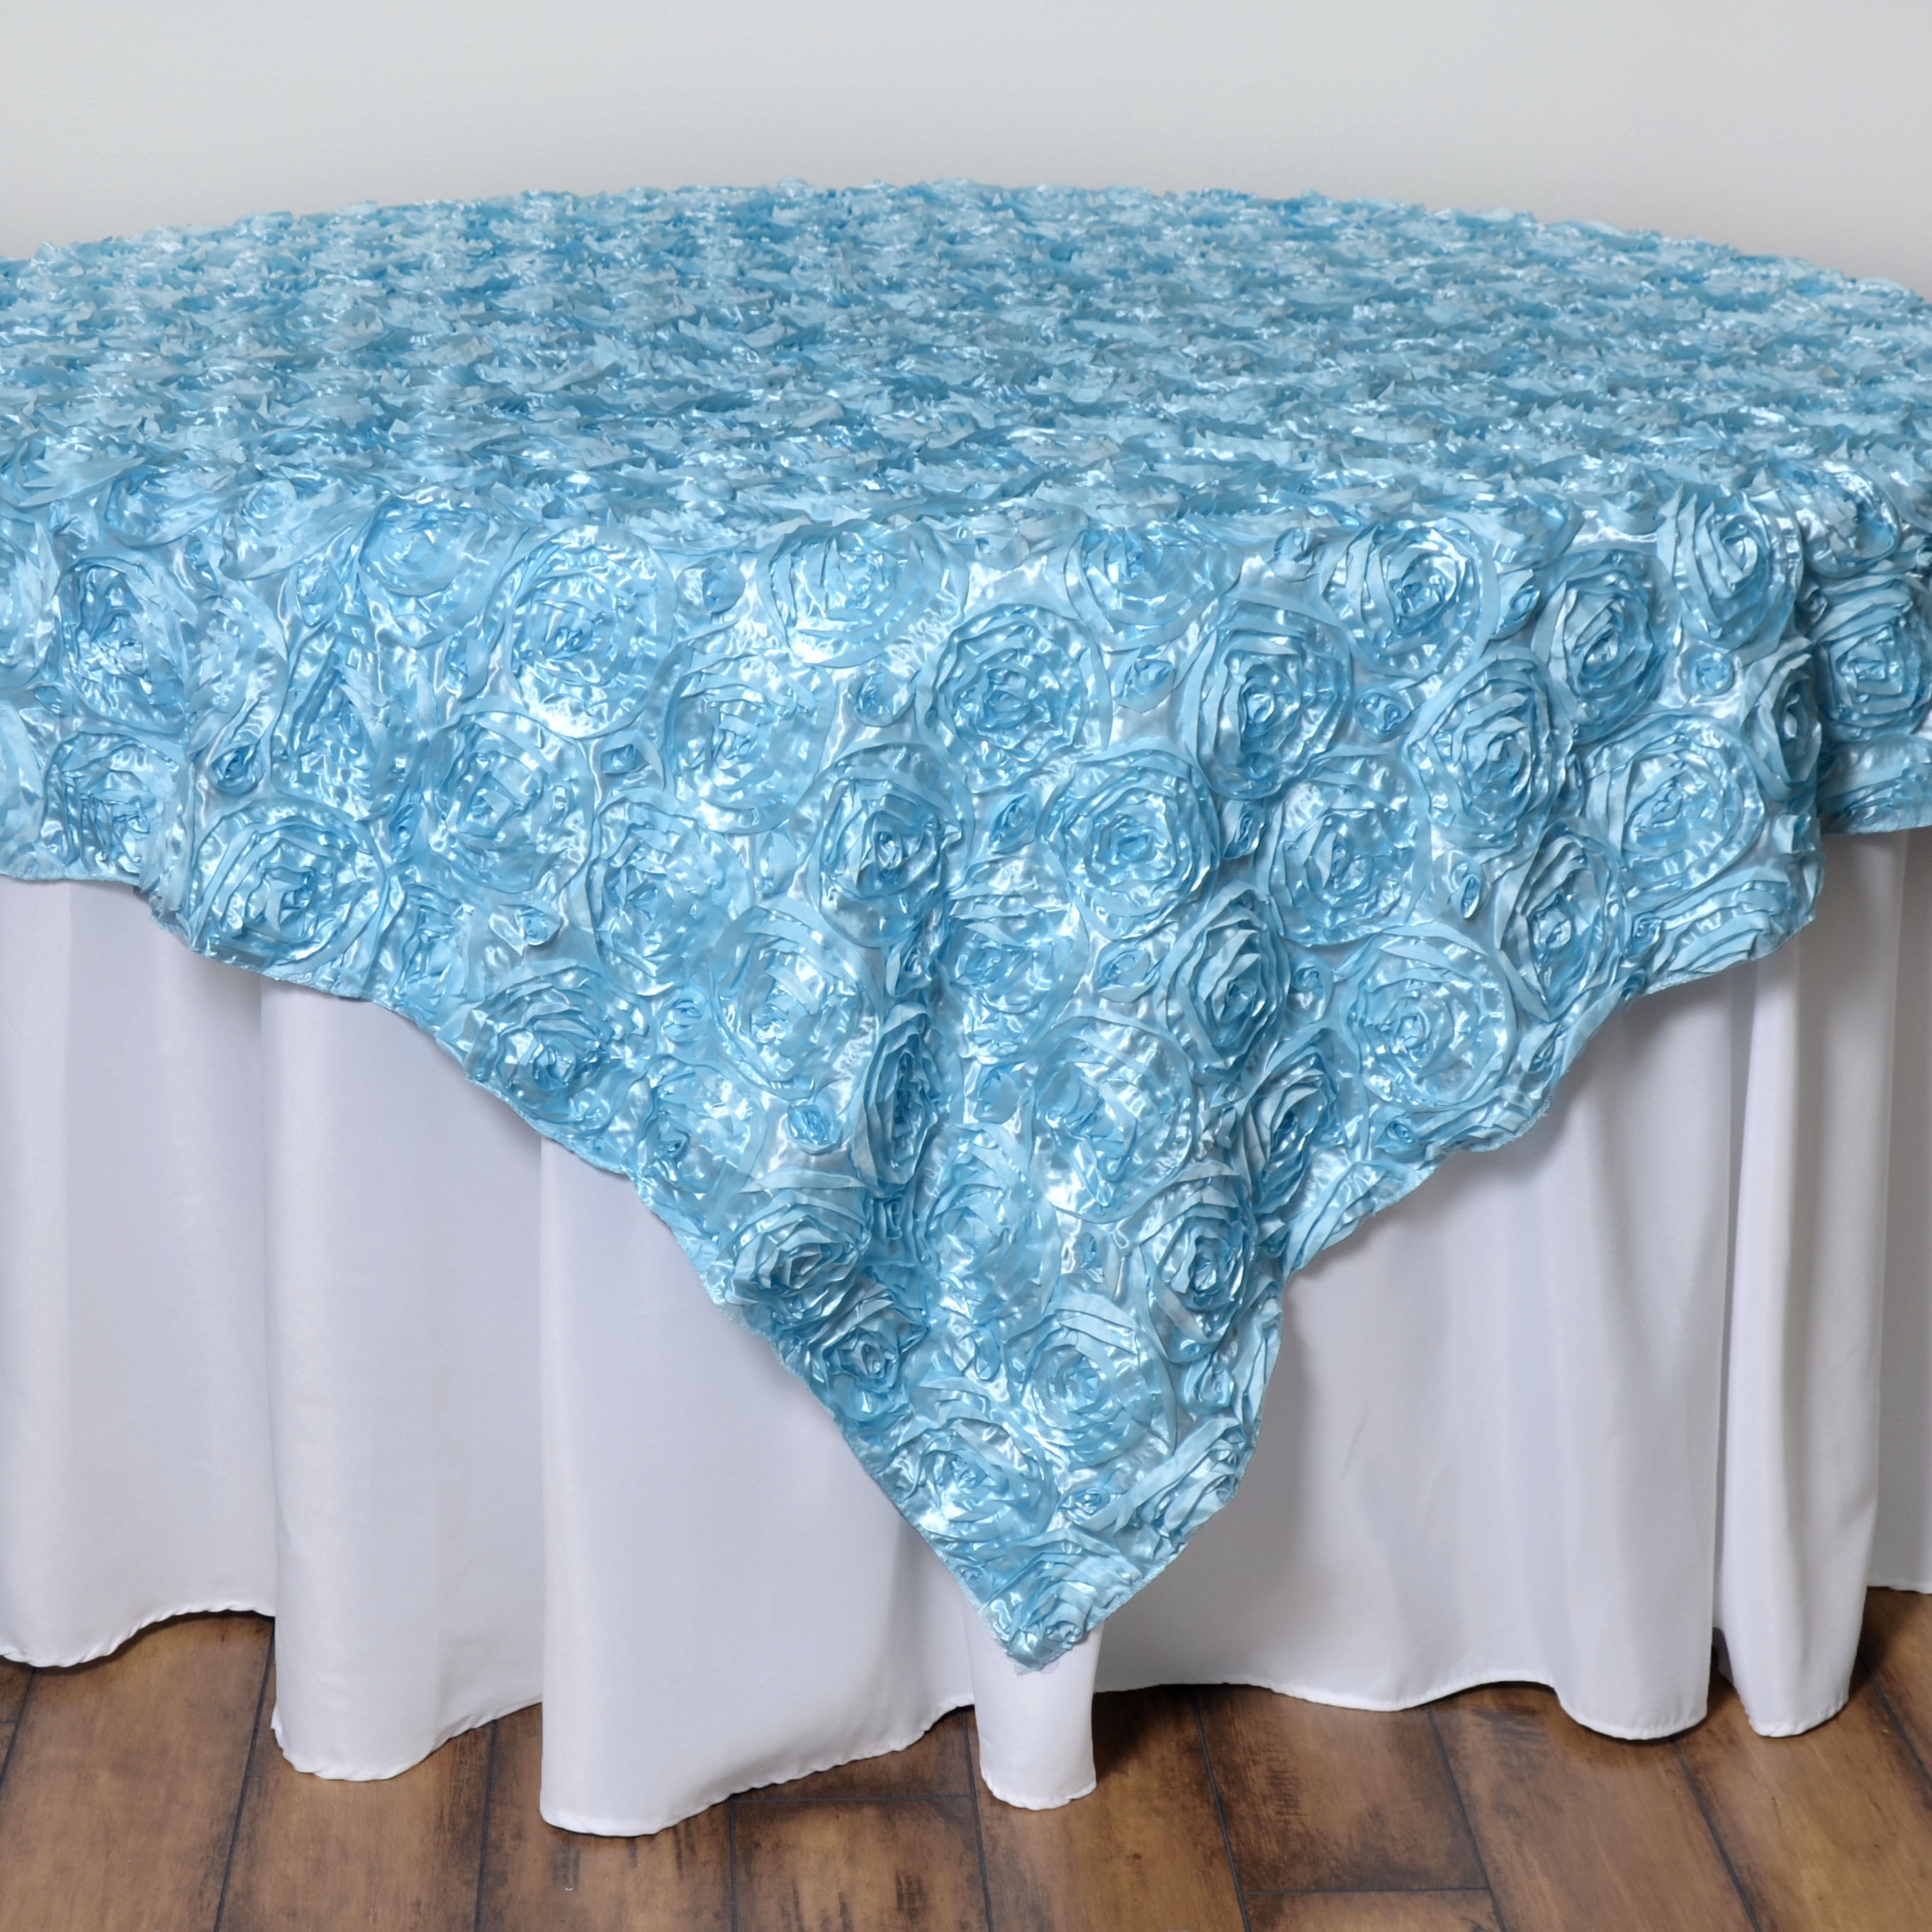 10 Rosette Satin Overlays Turquoise 54"x54" Tablecloths Table Cover Ribbon Rose 